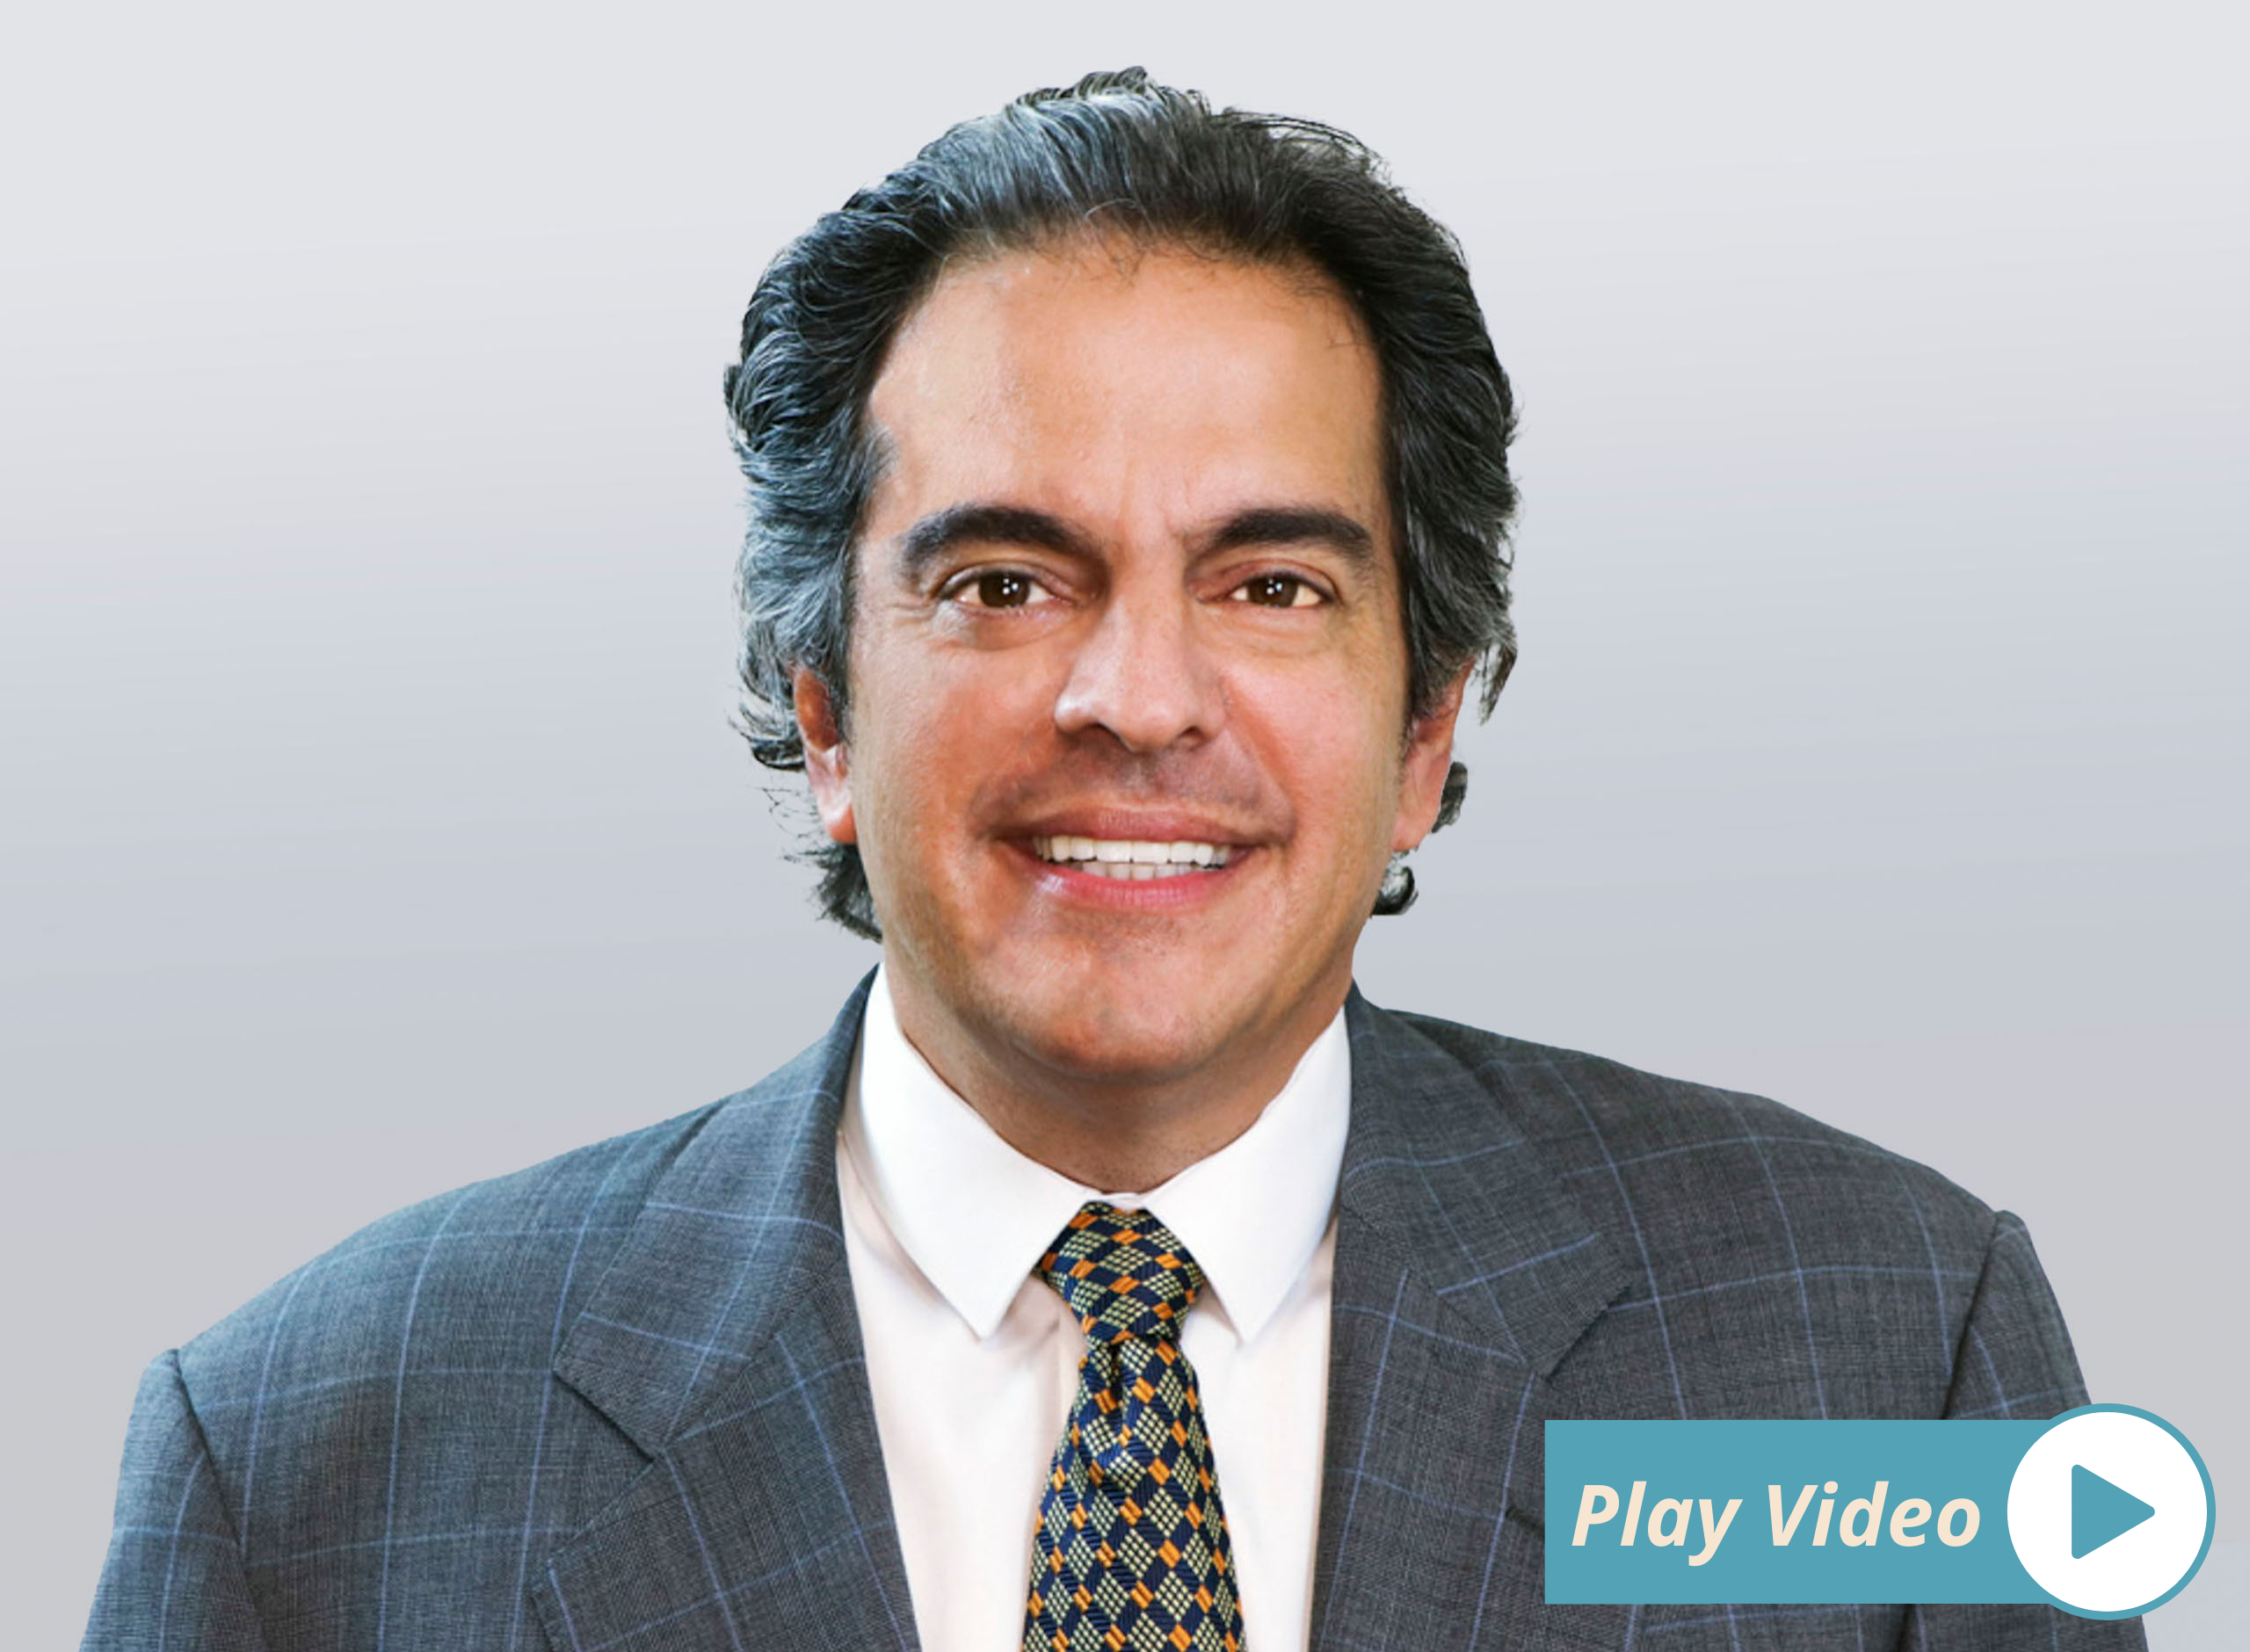 R.J. Impastato, A.R.M., Executive Vice President, Director of Client Relations. Click to play a video introduction.